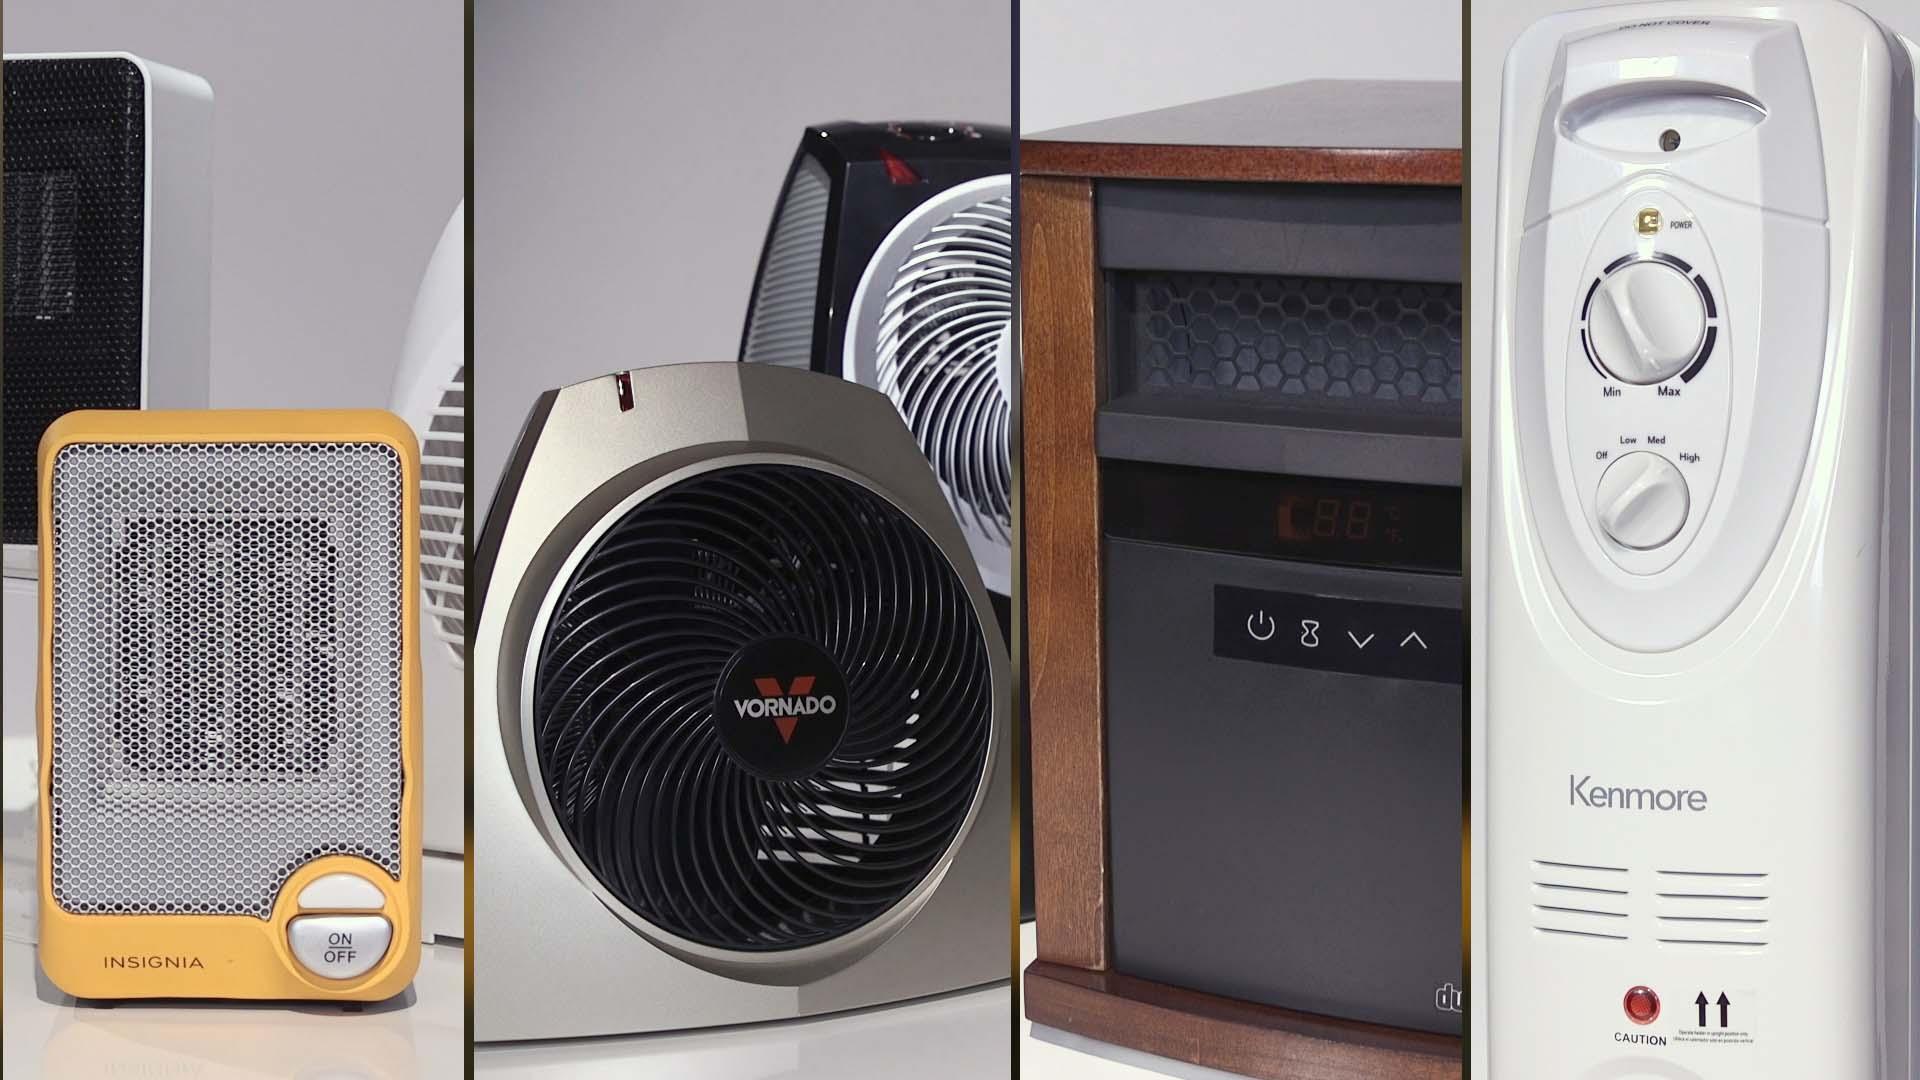 Heatwell Heater Reviews - Does Heat Well Portable Space Heater Work Or Scam  Product?